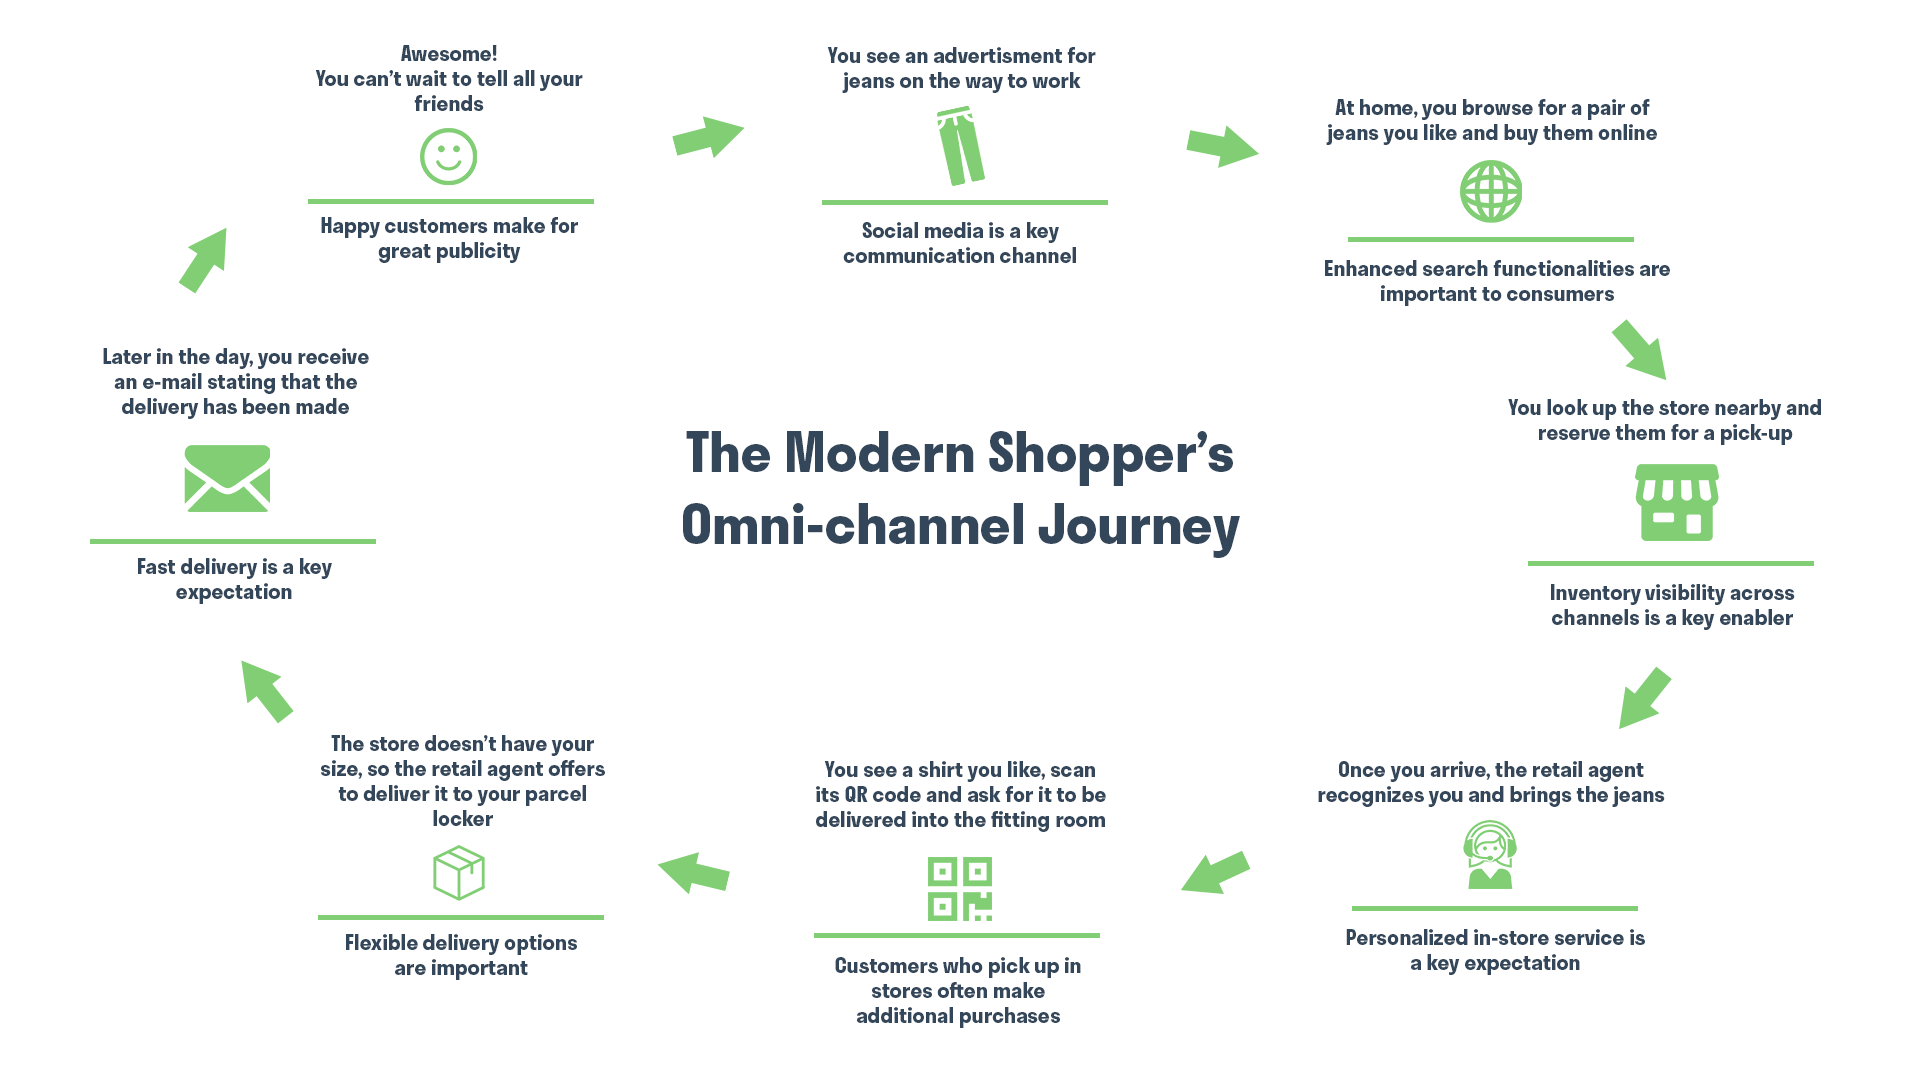 The Modern Shopper's Omni-channel Journey. Experience Marketing. The 4Es. Hurree.